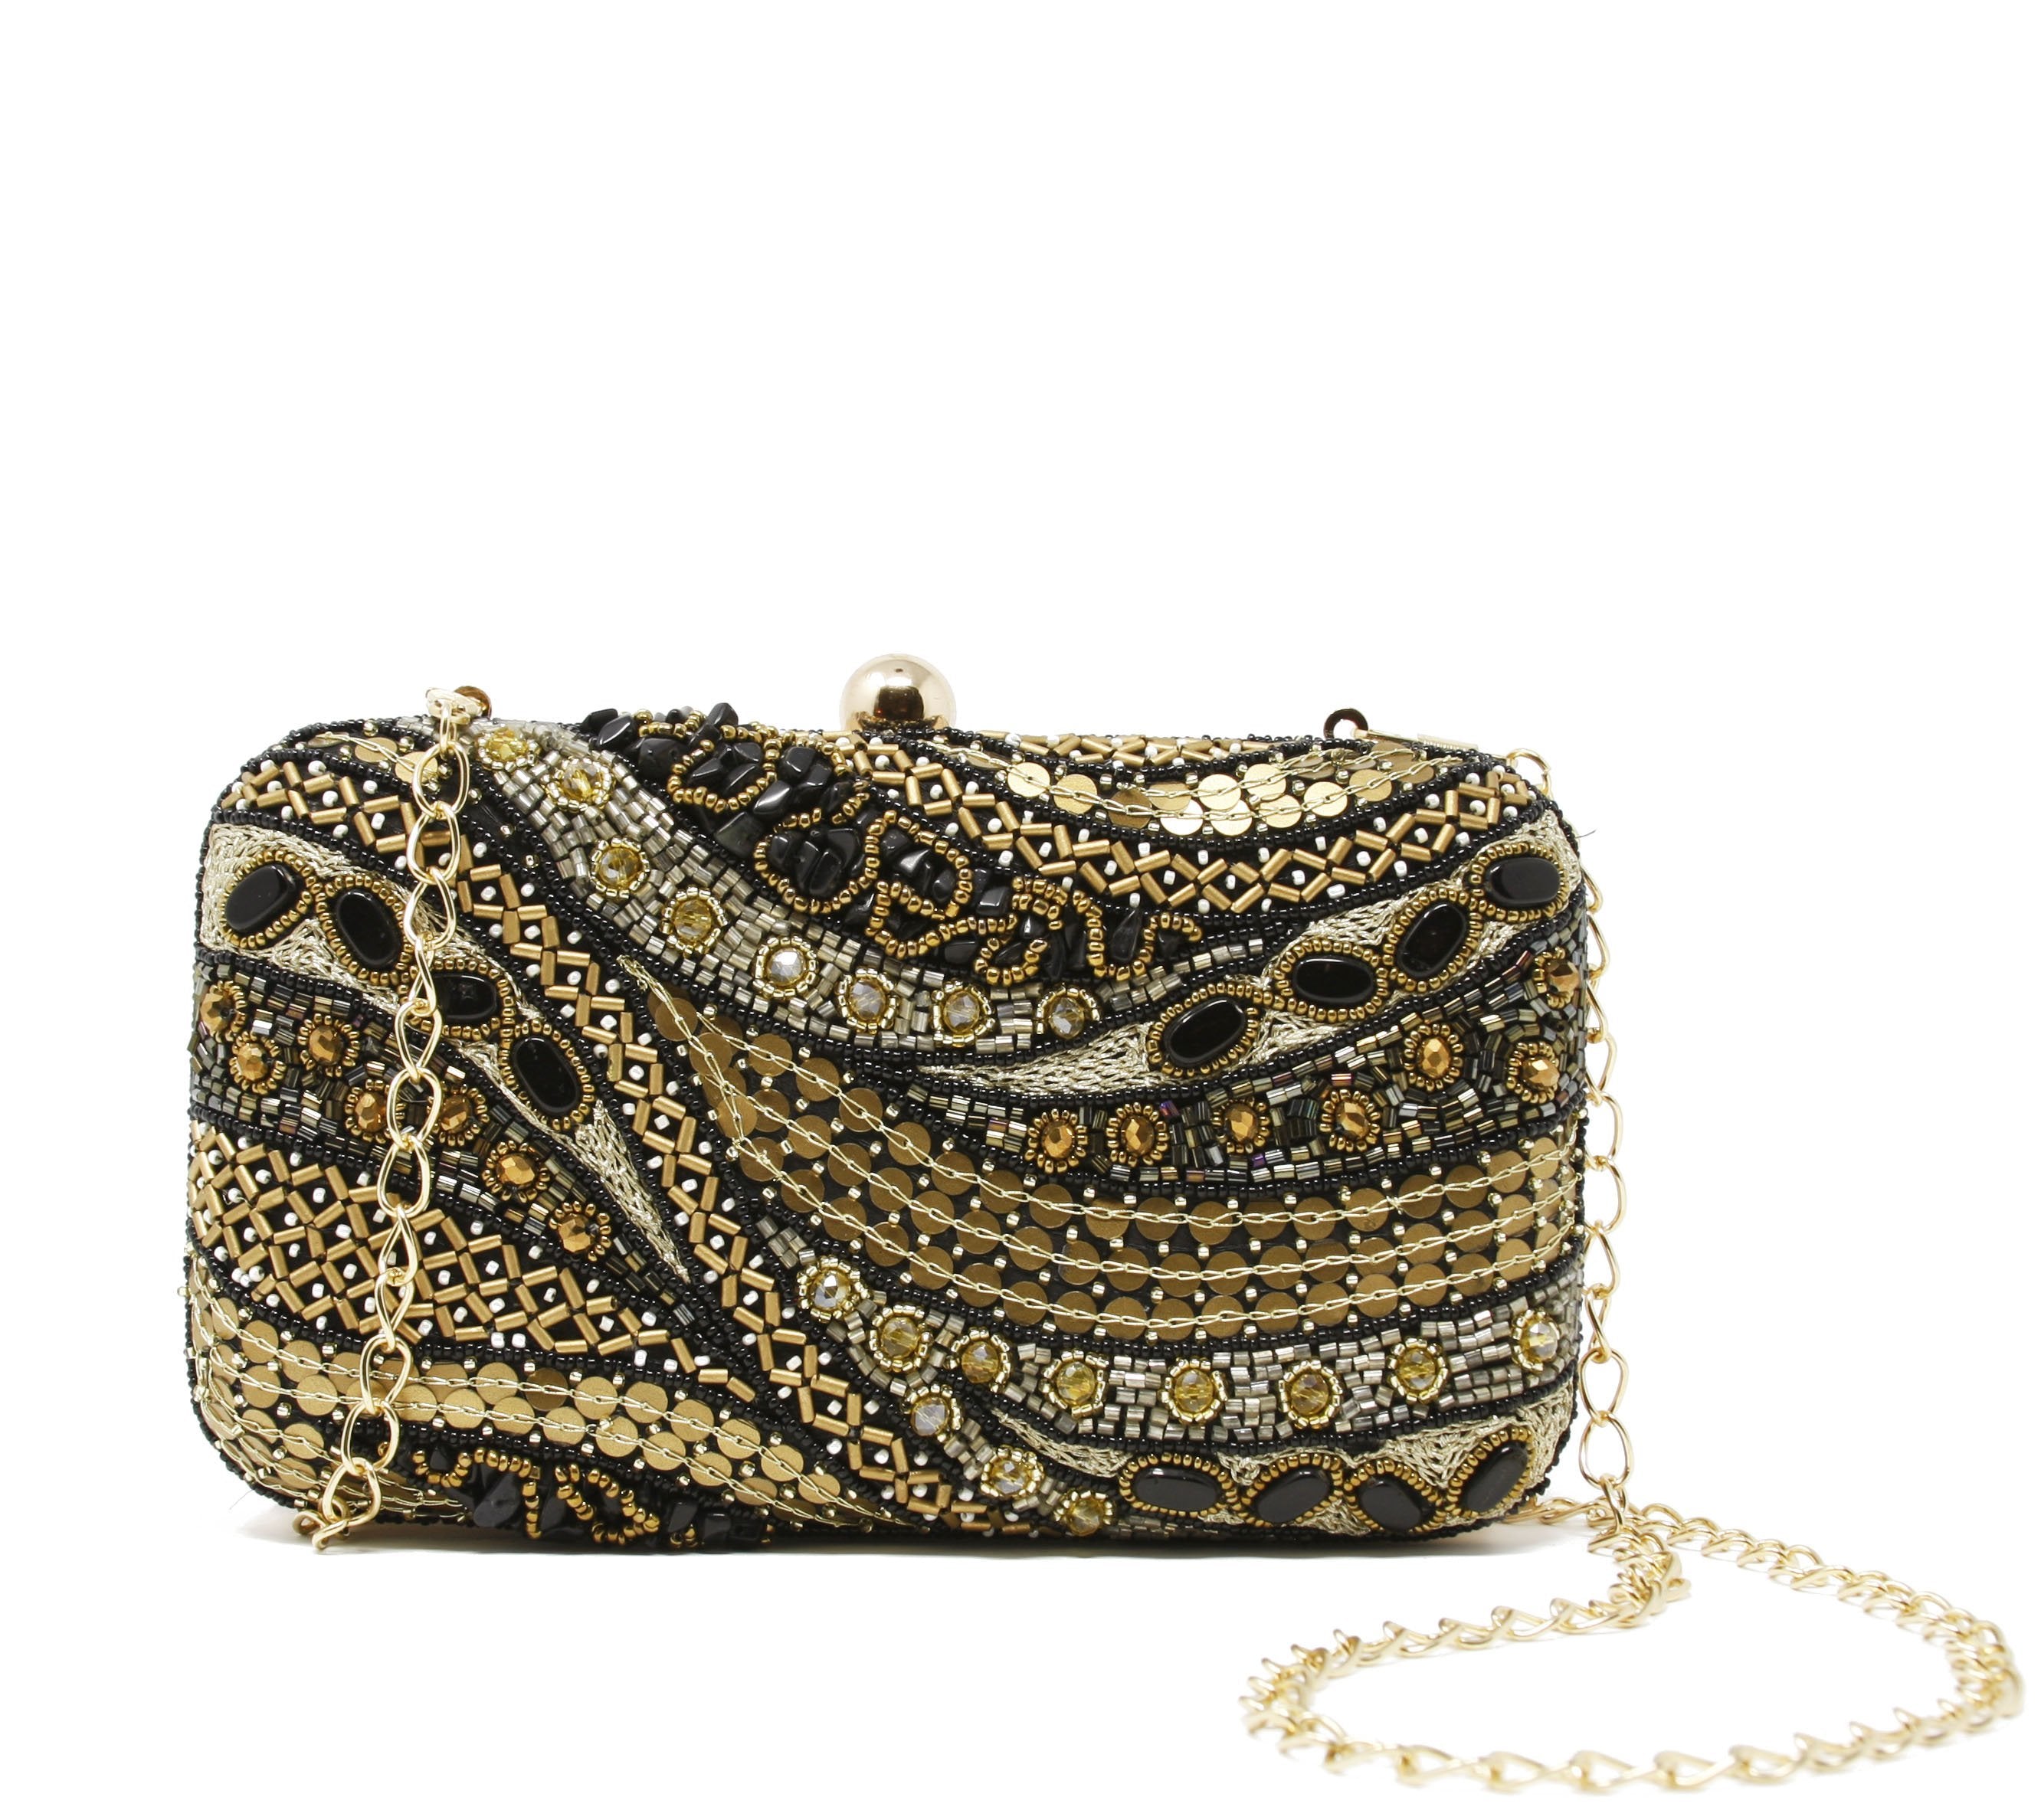  Sparkly gold and black clutch evening bag with back plain black woven fabric.